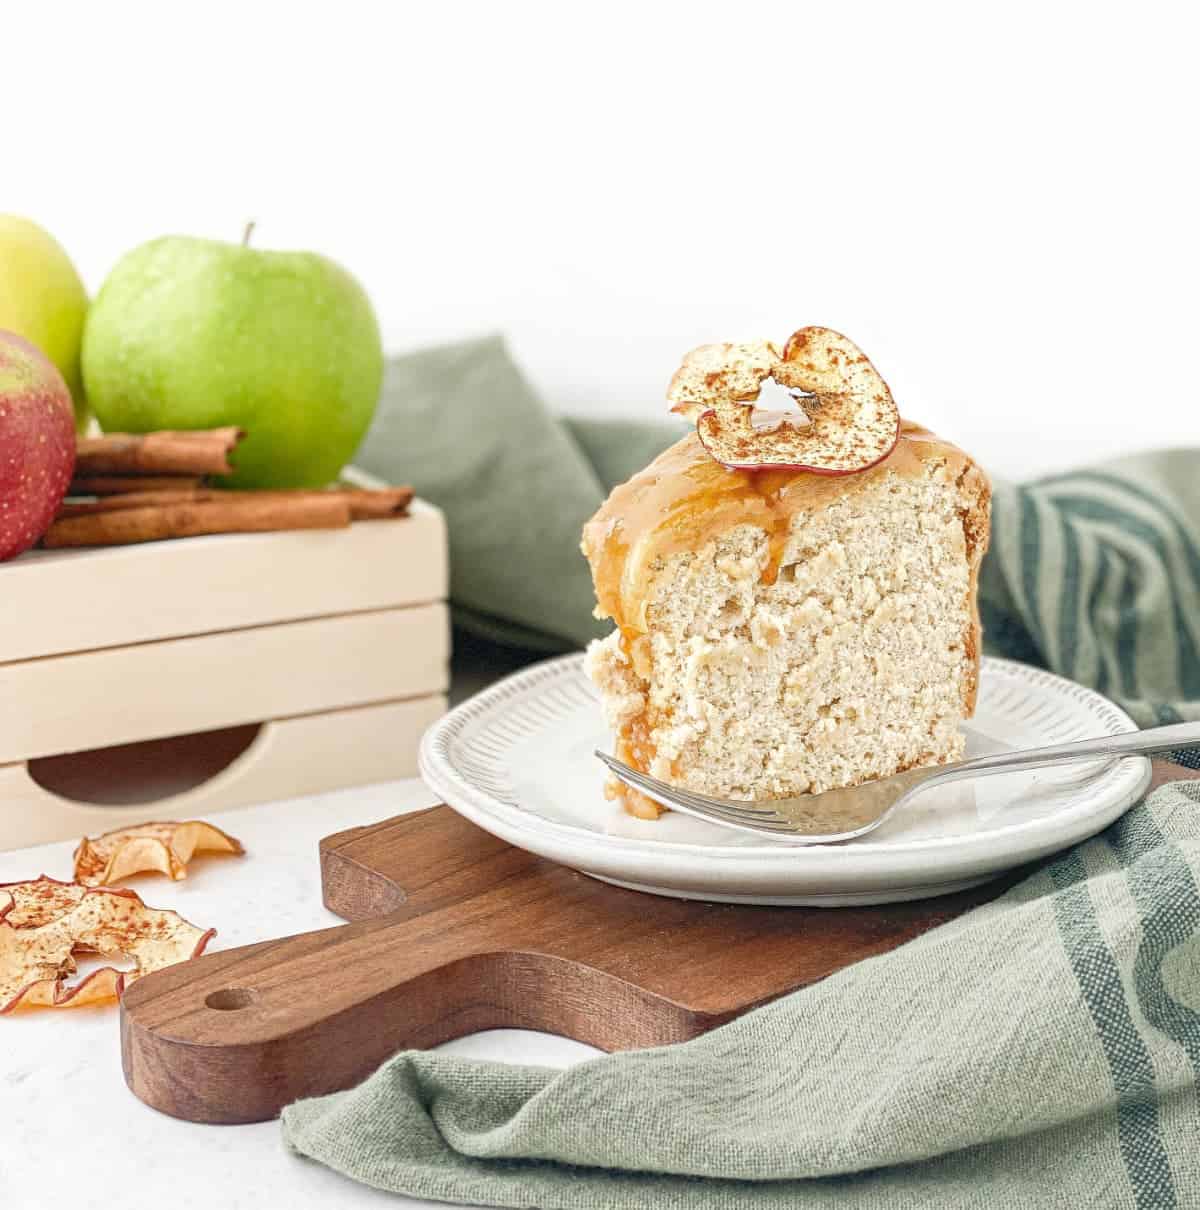 Slice of Caramel Apple Angel Food Cake on a plate with apples and cinnamon sticks nearby